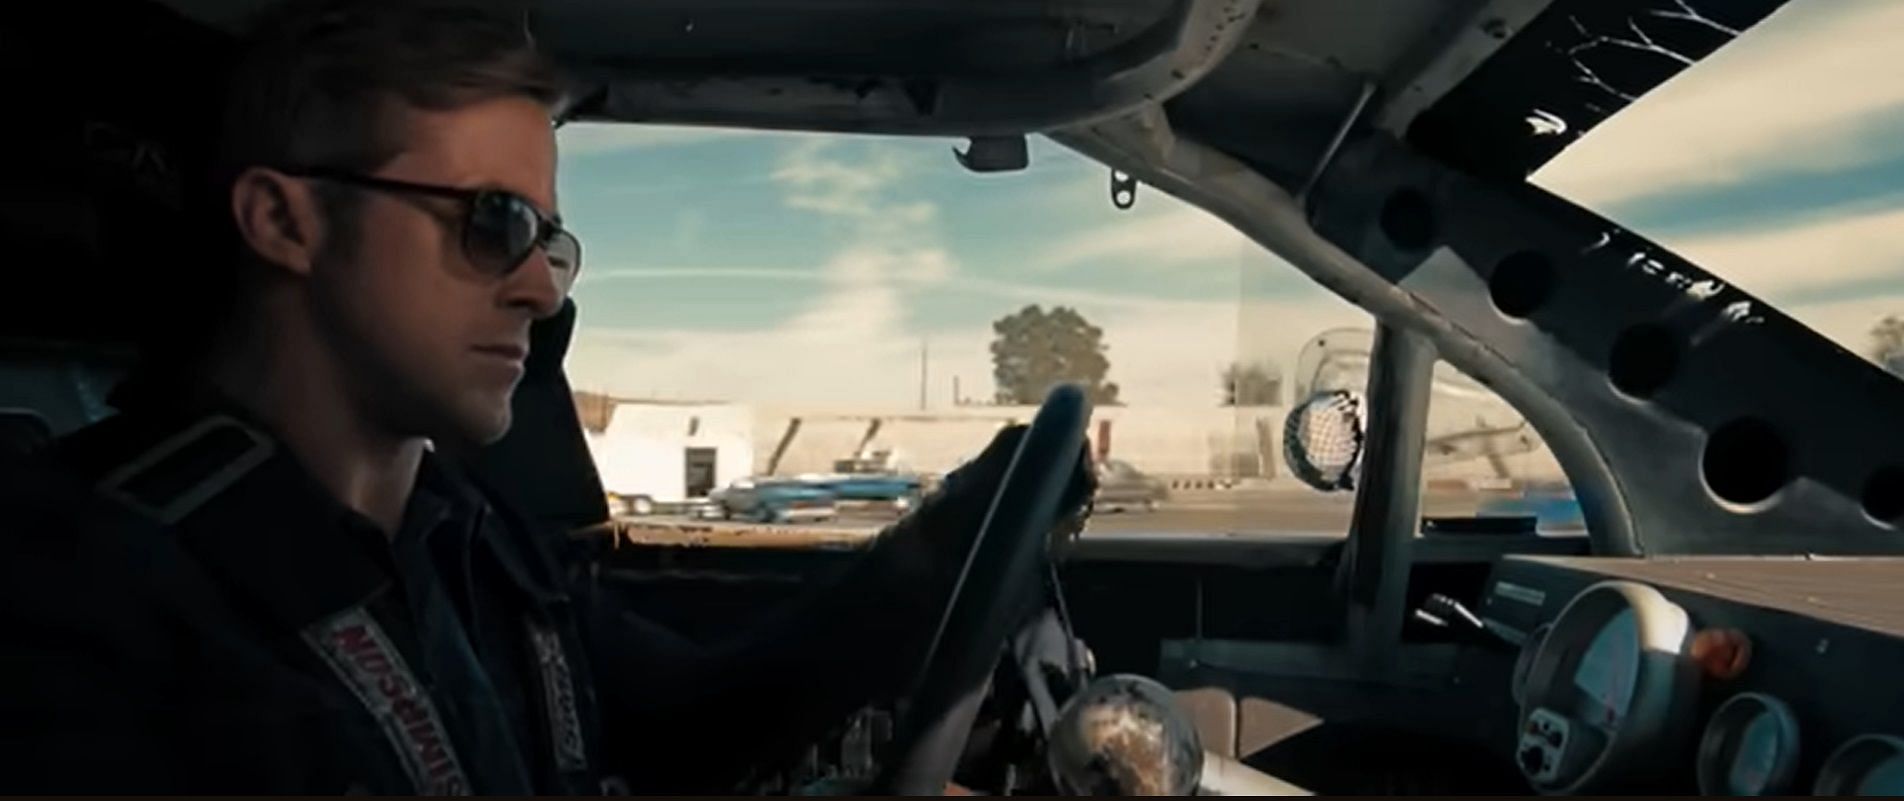 A screenshot from the trailer of the 2011 film Drive (Image via Rotten Tomatoes Trailer, Drive trailer, 0:40)